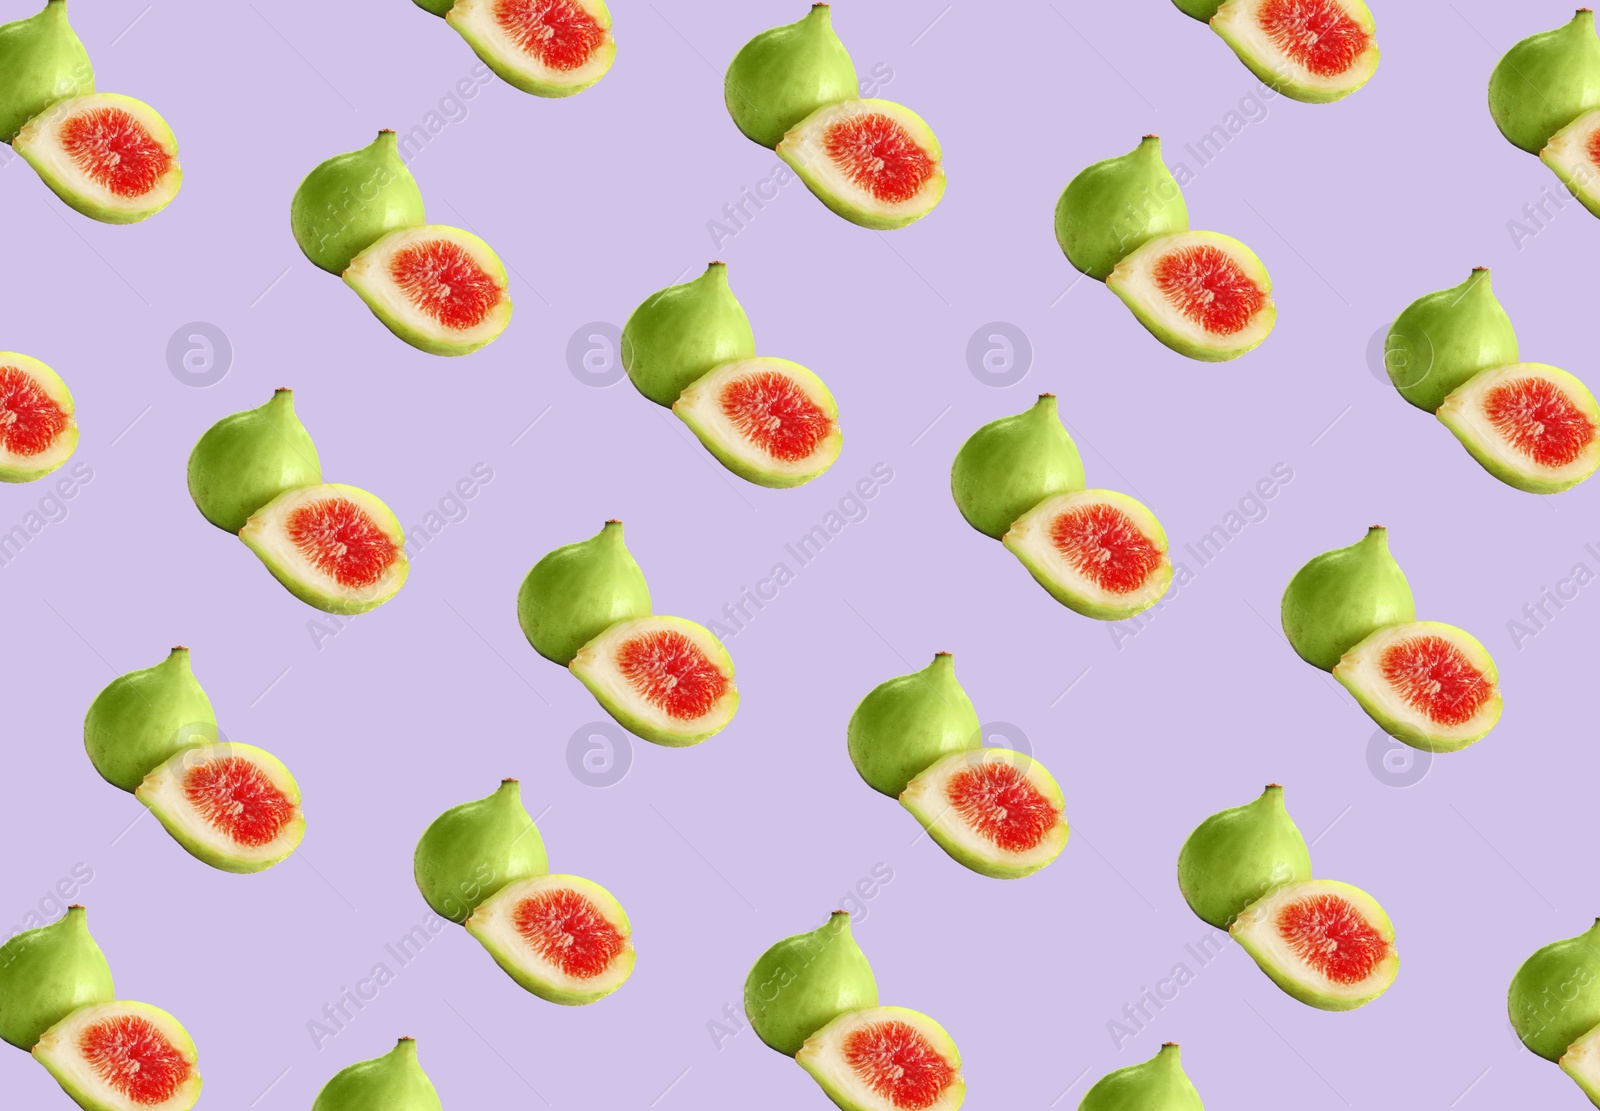 Image of Pattern of cut and whole green figs on lavender background